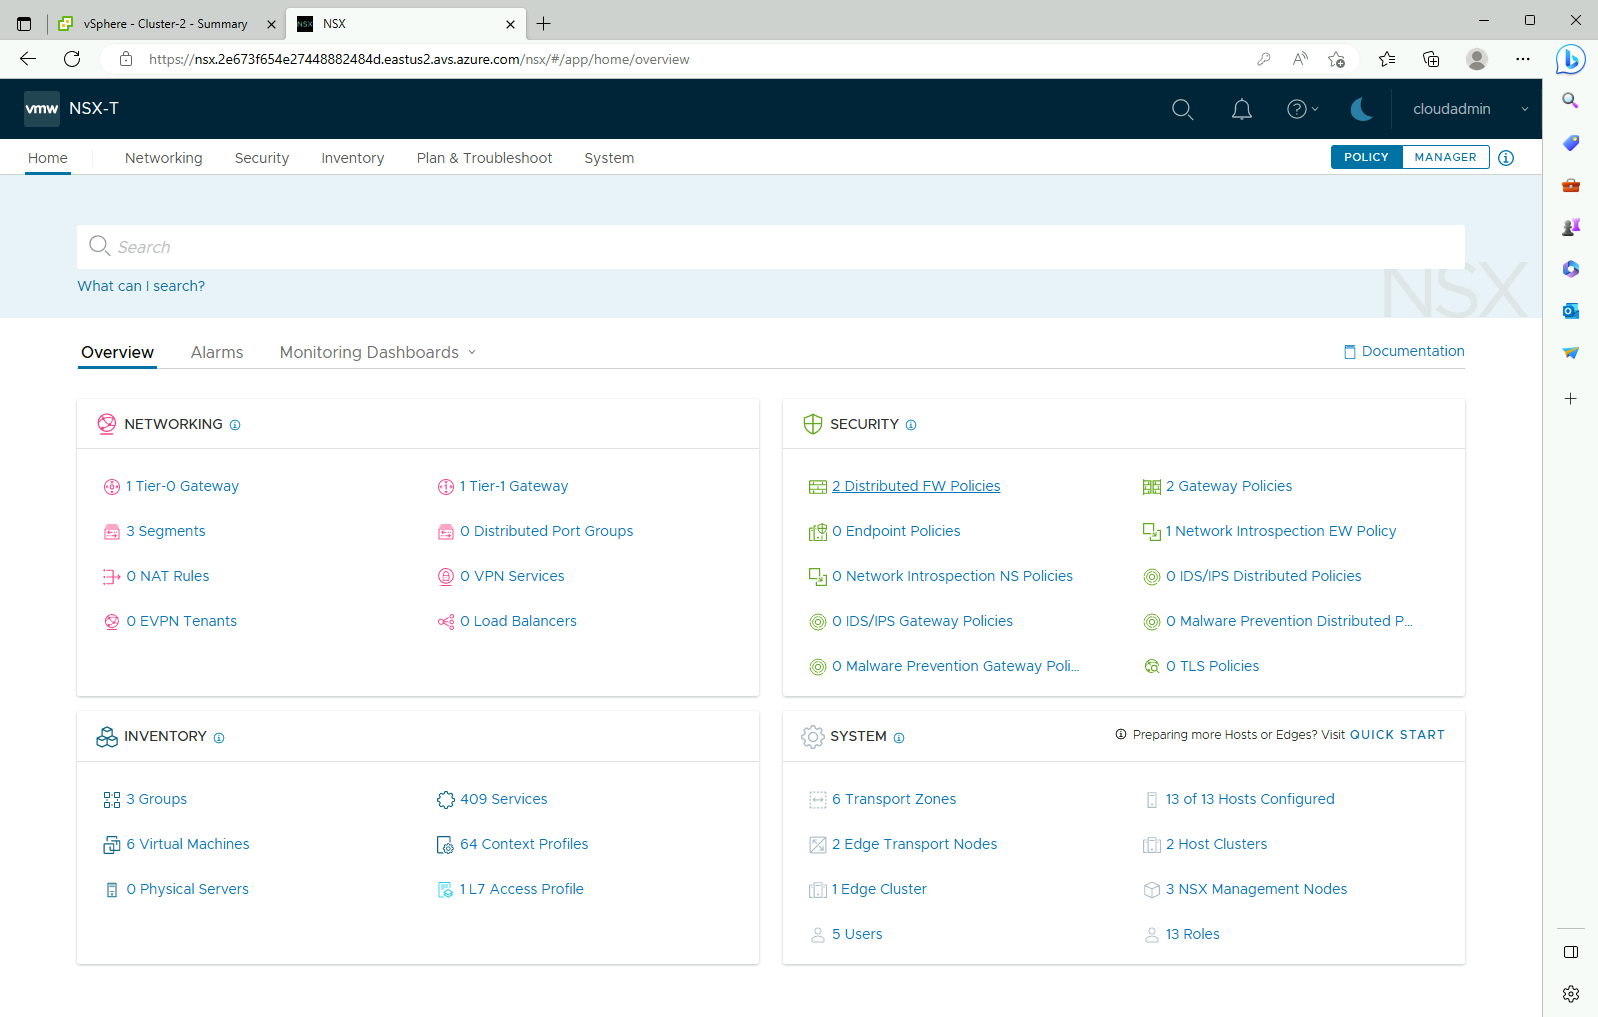 Screenshot of the NSX-T Manager Overview.